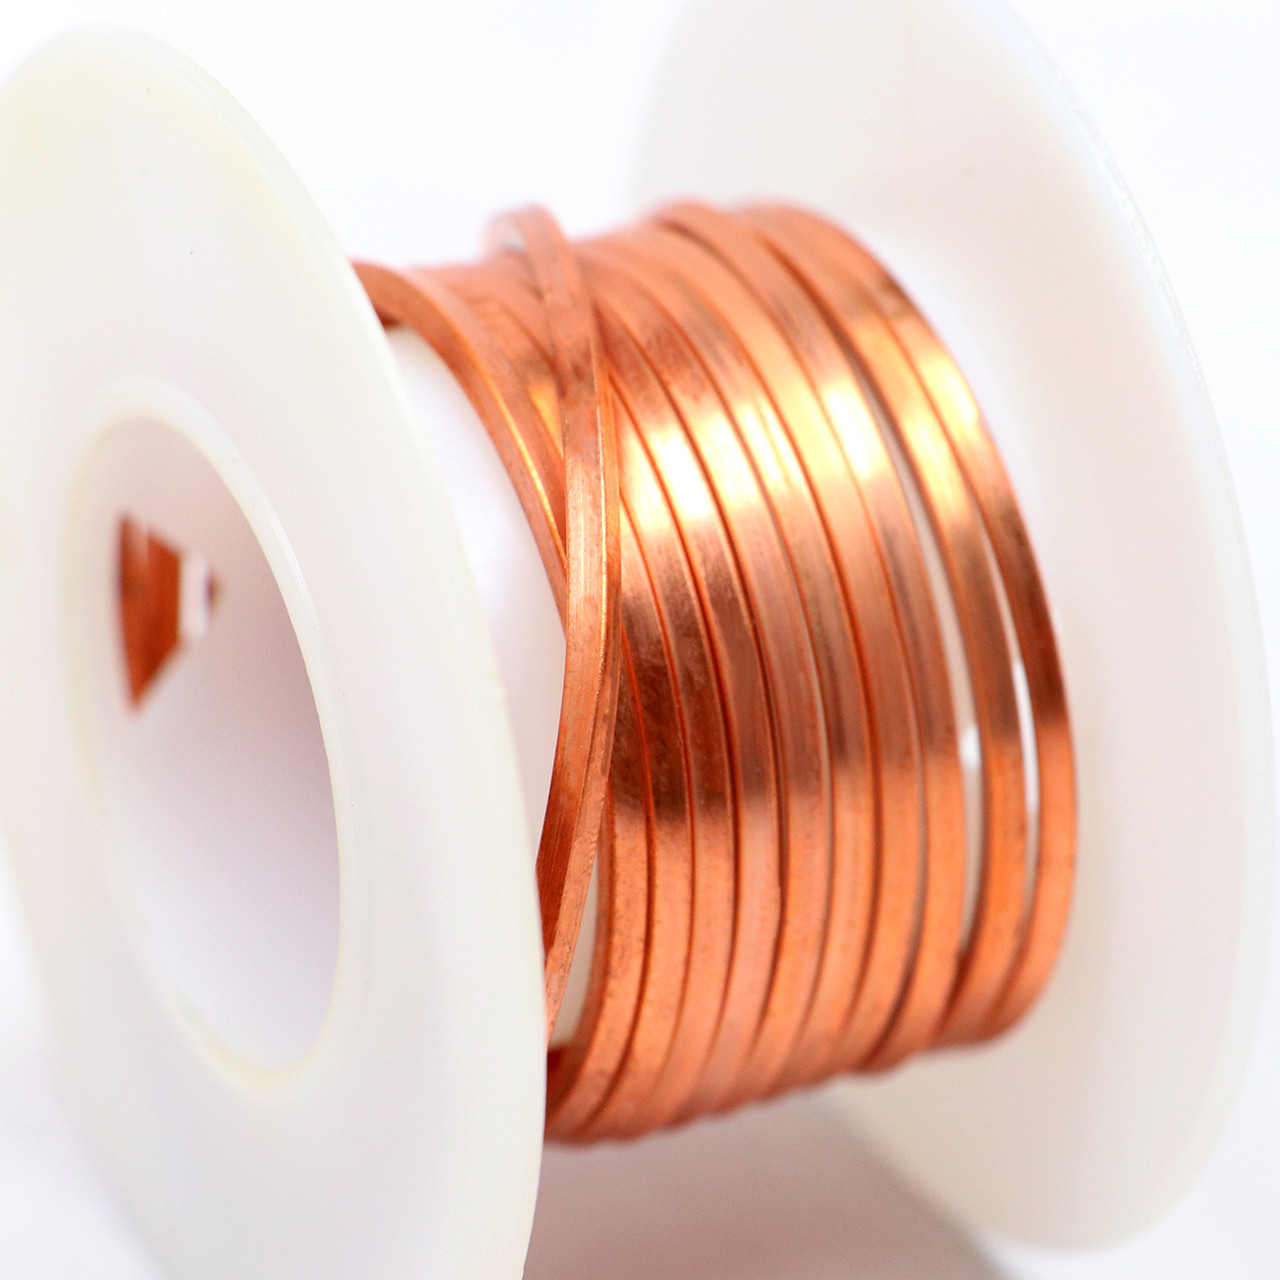 1/2 Hard 1/2 Ounce Rose Gold Filled Wire